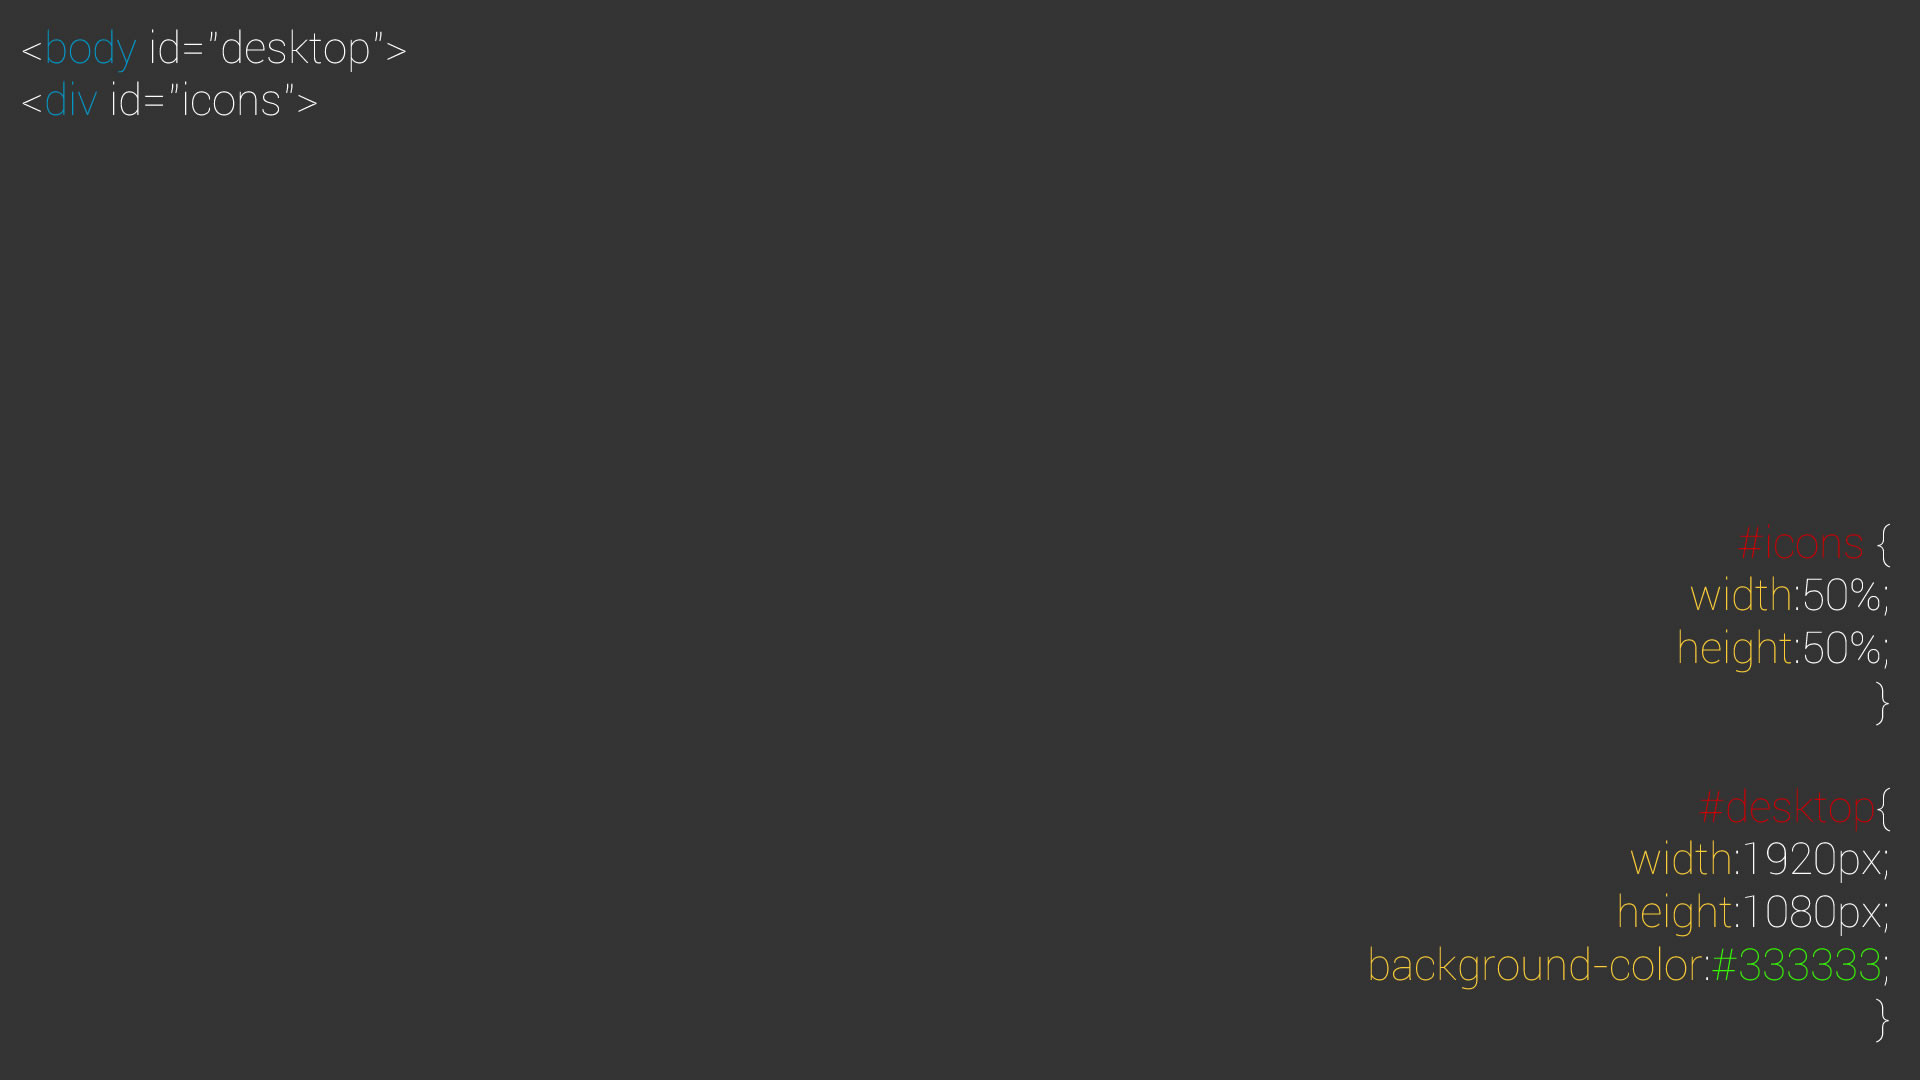 V2 Minimalist Highlighted Html Css Code Style Wallpaper